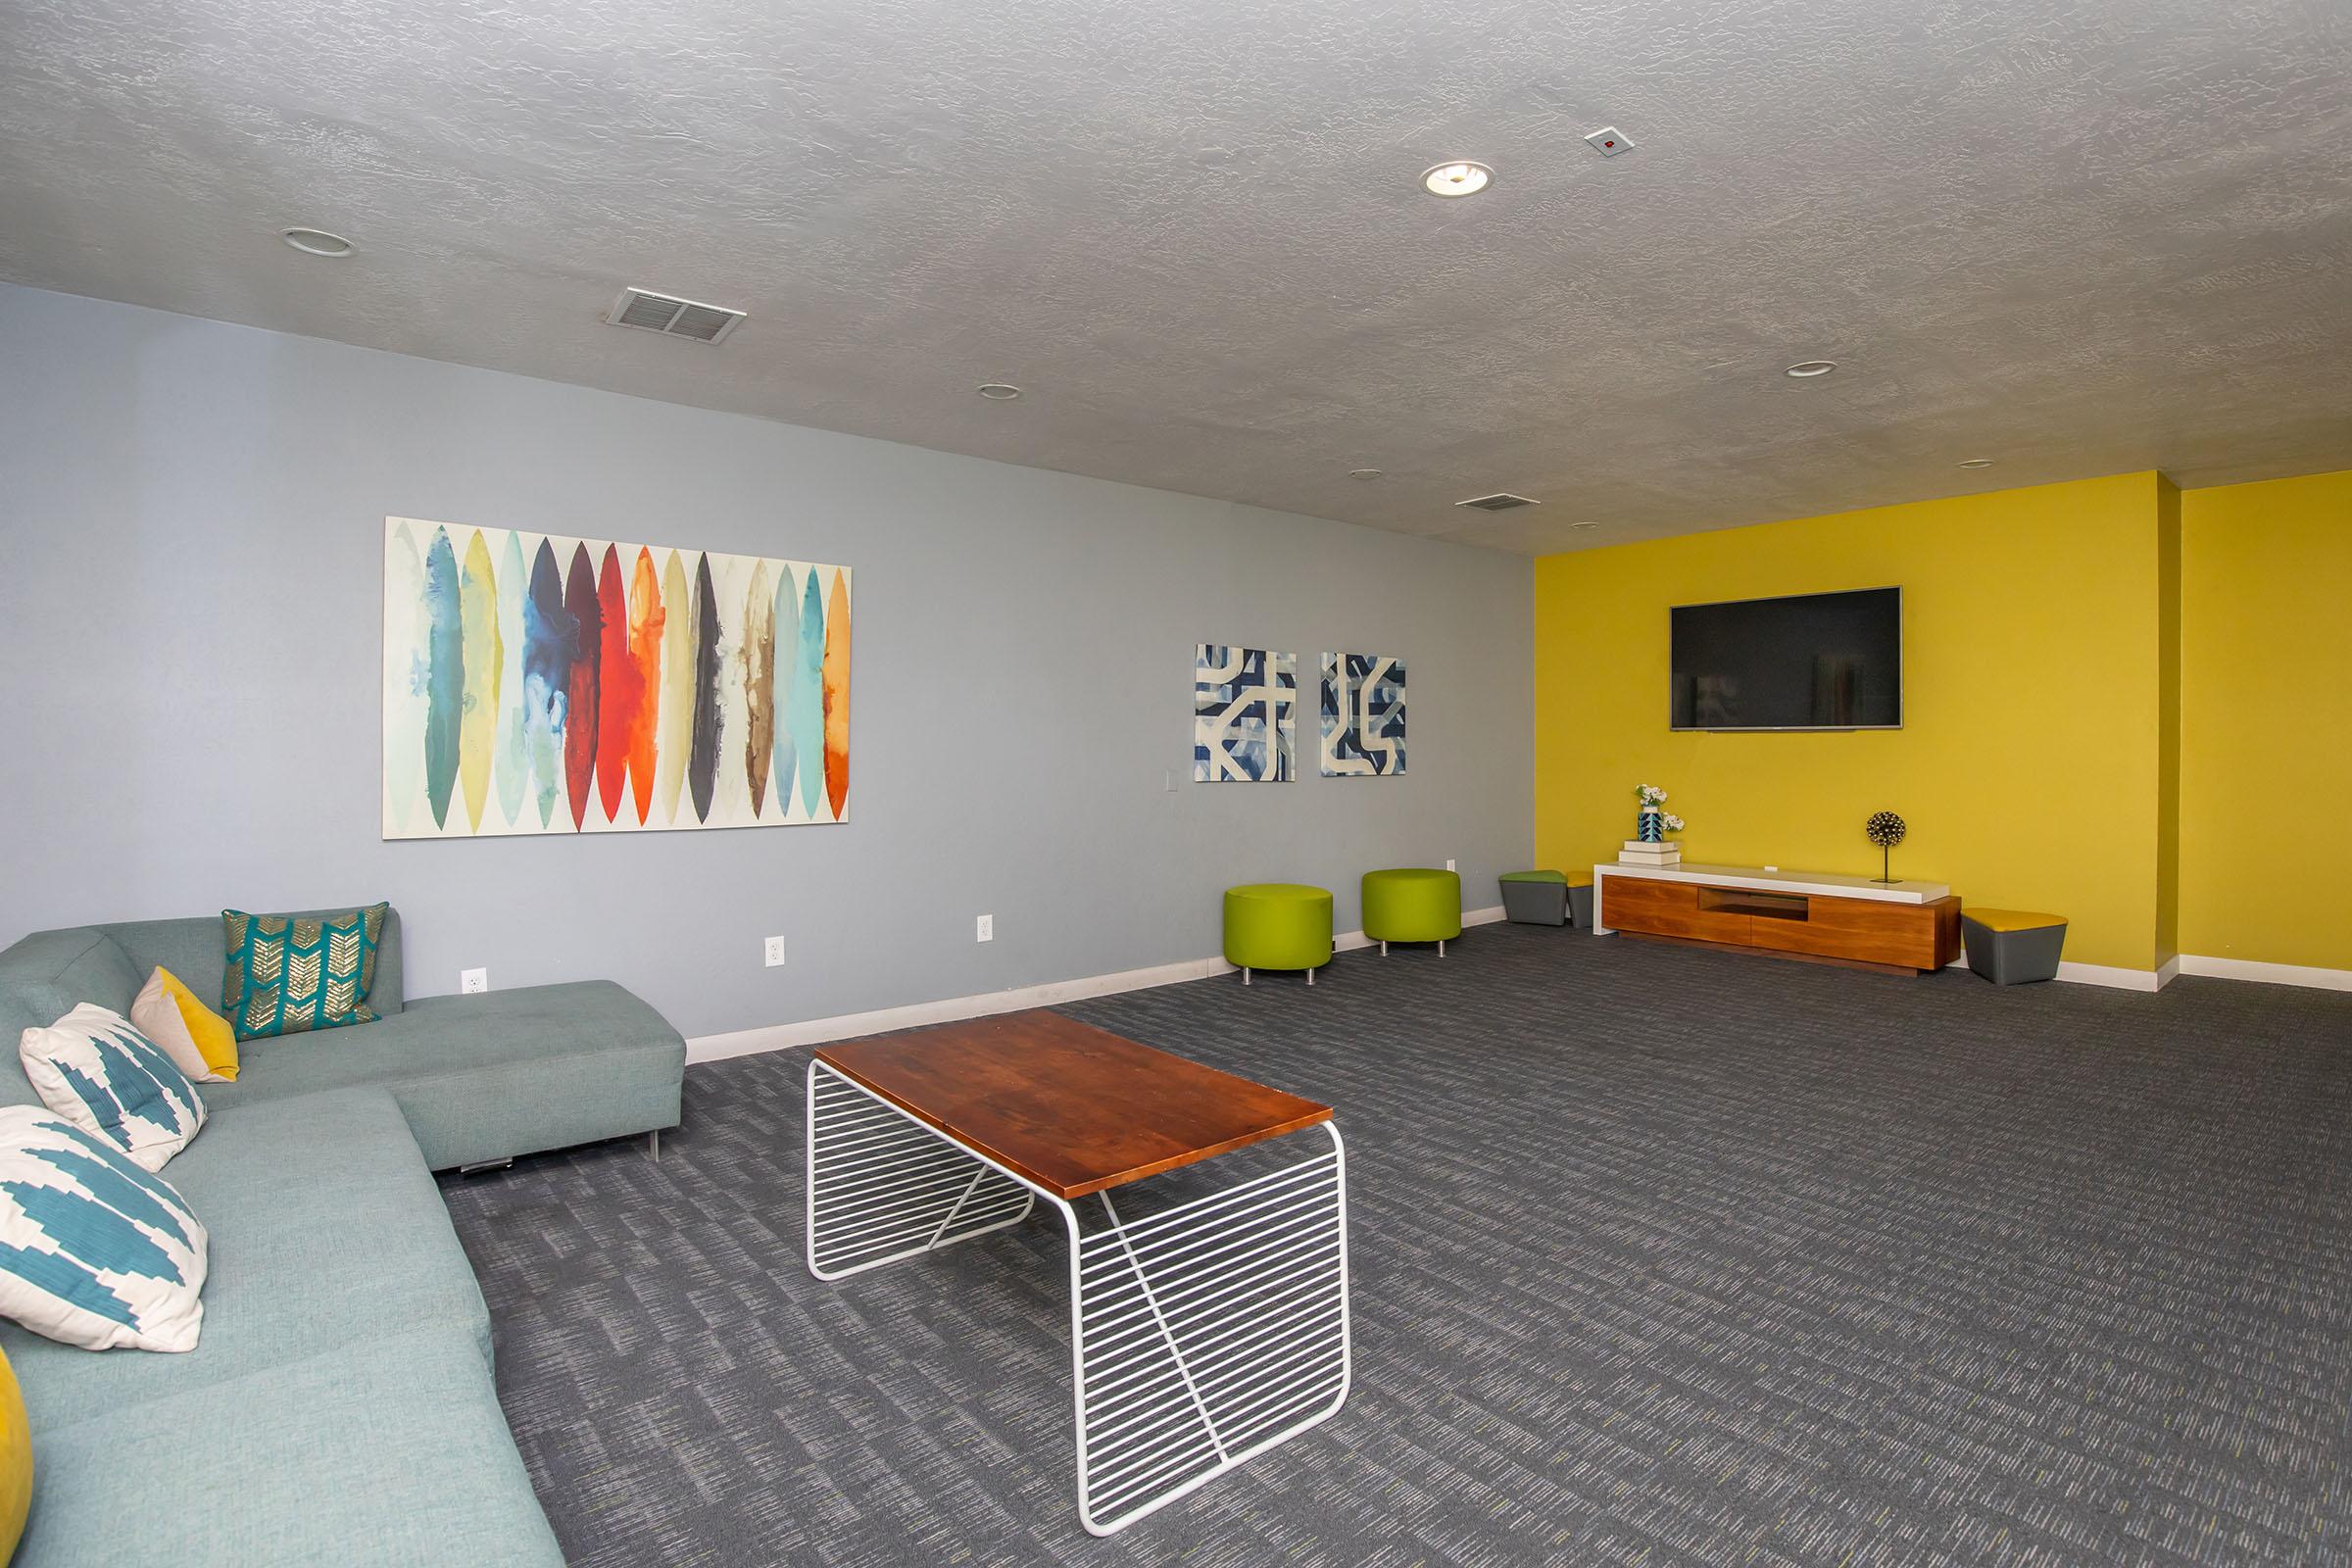 Indoor lounge at Rise at the District apartments featuring a sectional couch, coffee table, and flat screen TV on a yellow wall